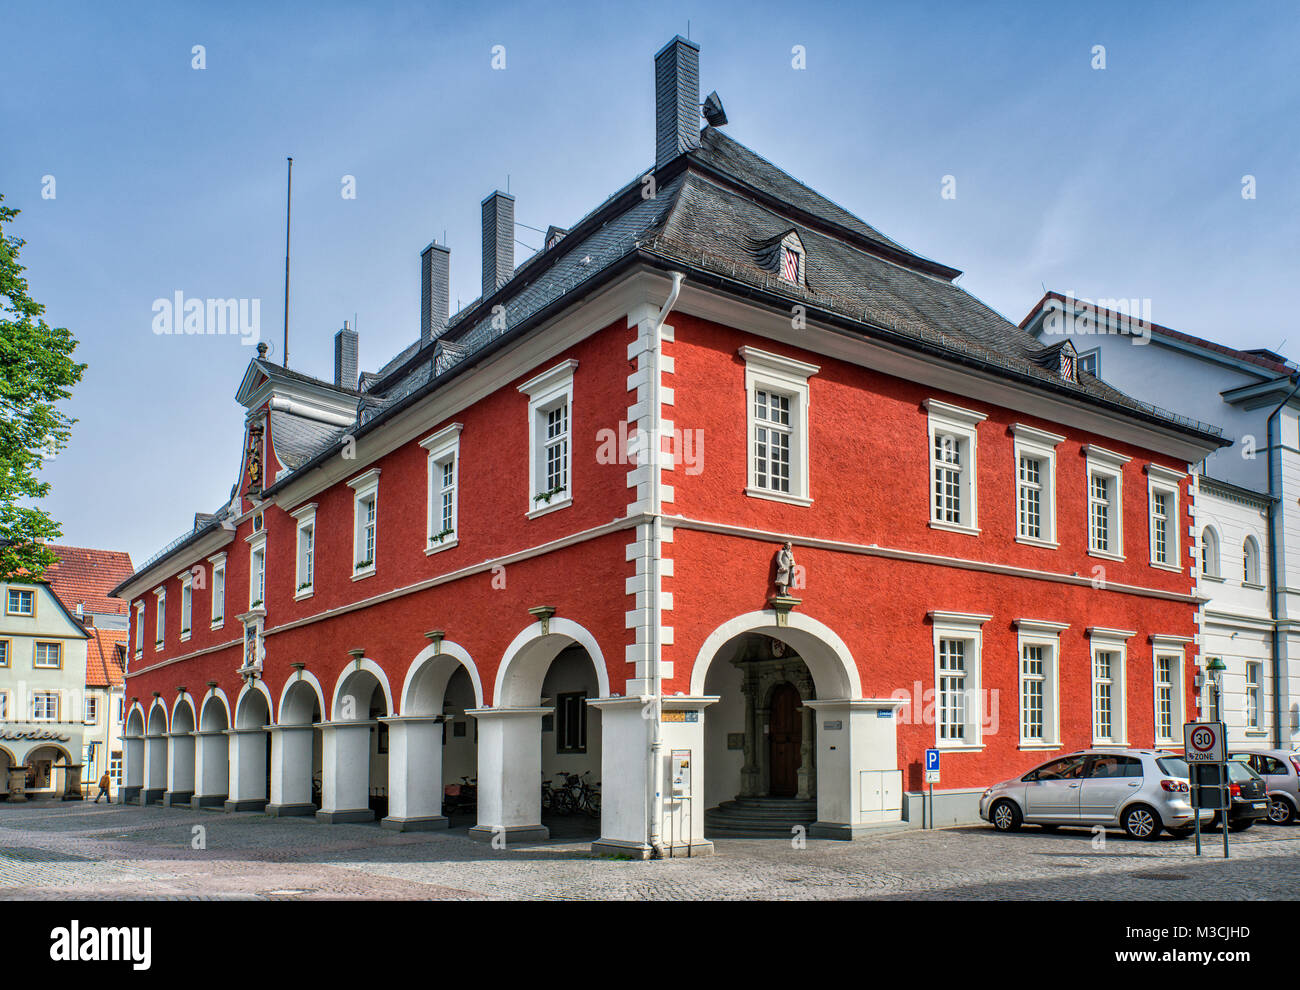 Arched portico at Rathaus (Town Hall) in Soest, Ostwestfalen Region, North Rhine-Westphalia, Germany Stock Photo